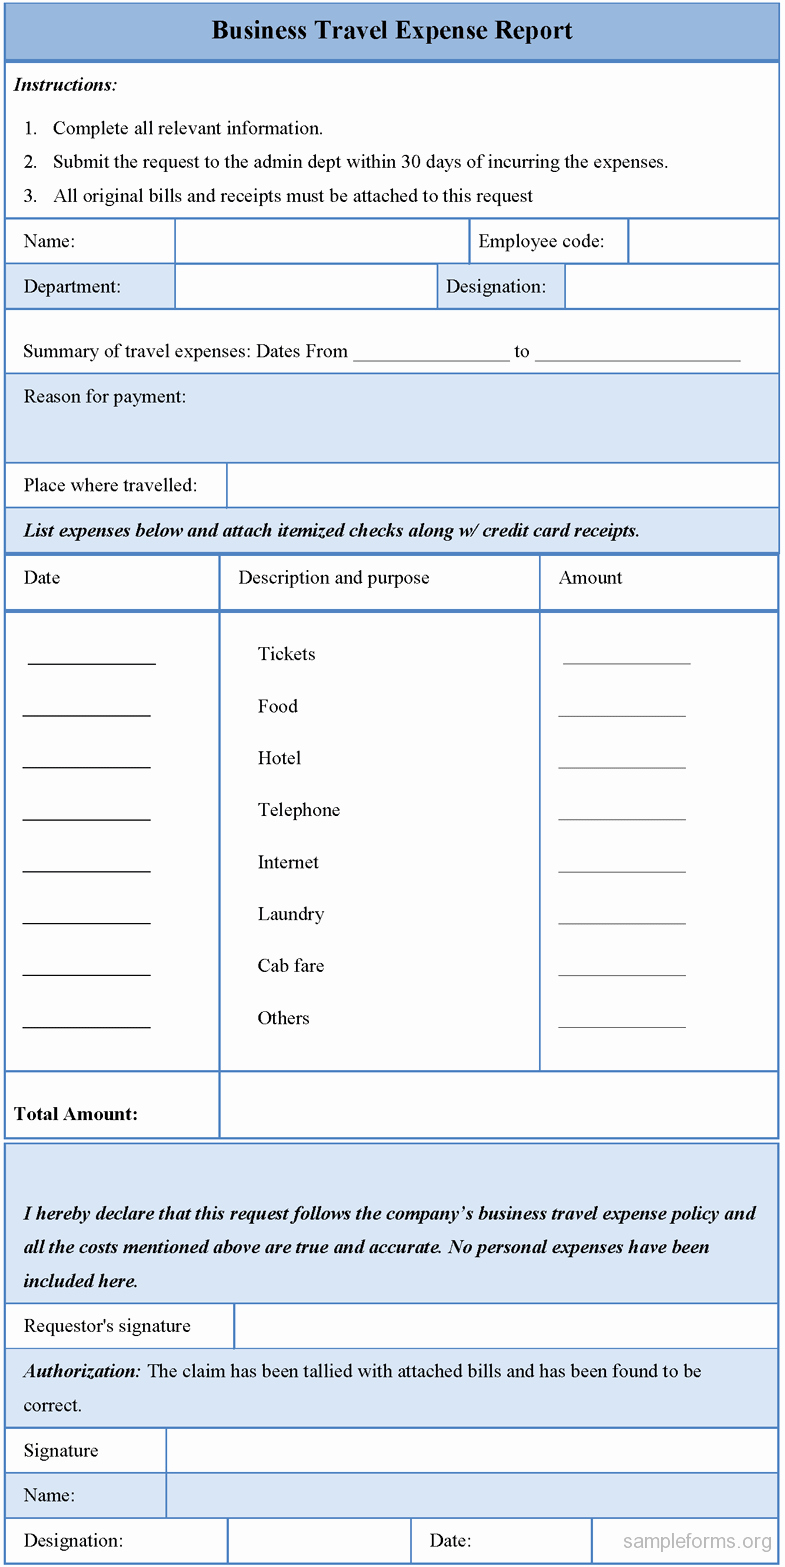 Business Travel Expense Report Template Awesome Business Travel Expense Report form Sample forms